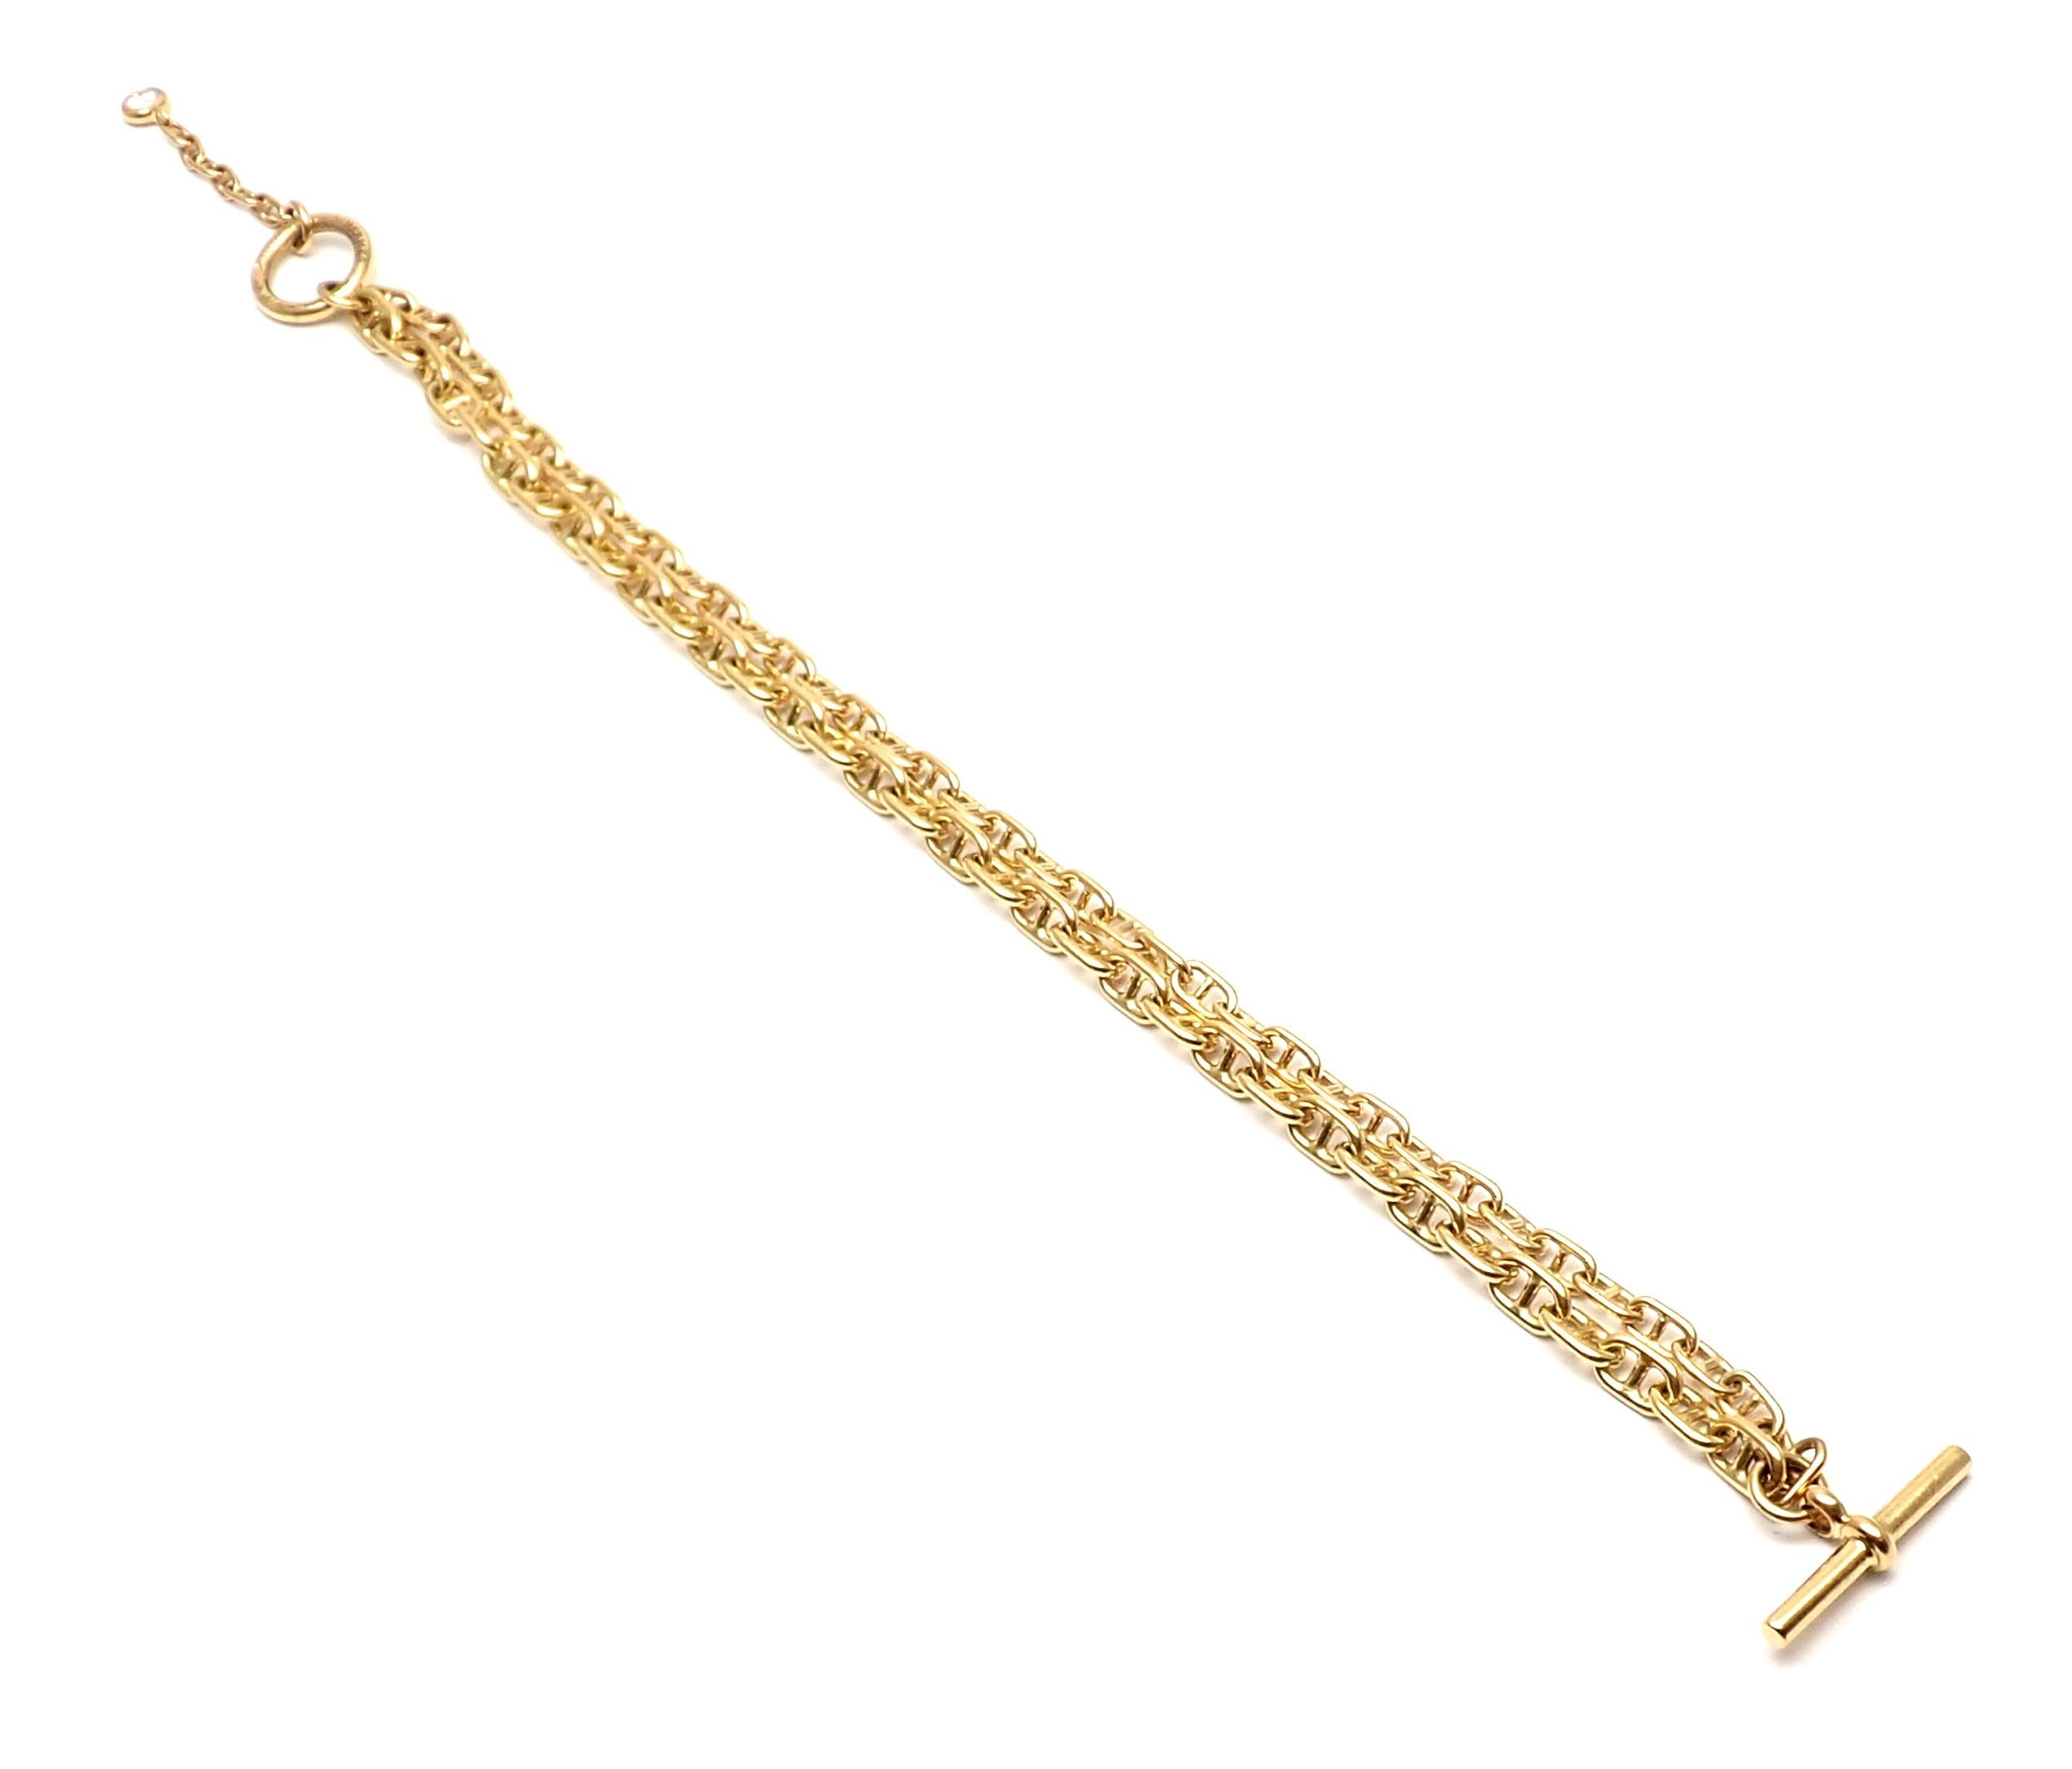 Hermes Chaine d'Ancre Enchainee Diamond Yellow Gold Double Link Toggle Bracelet 3